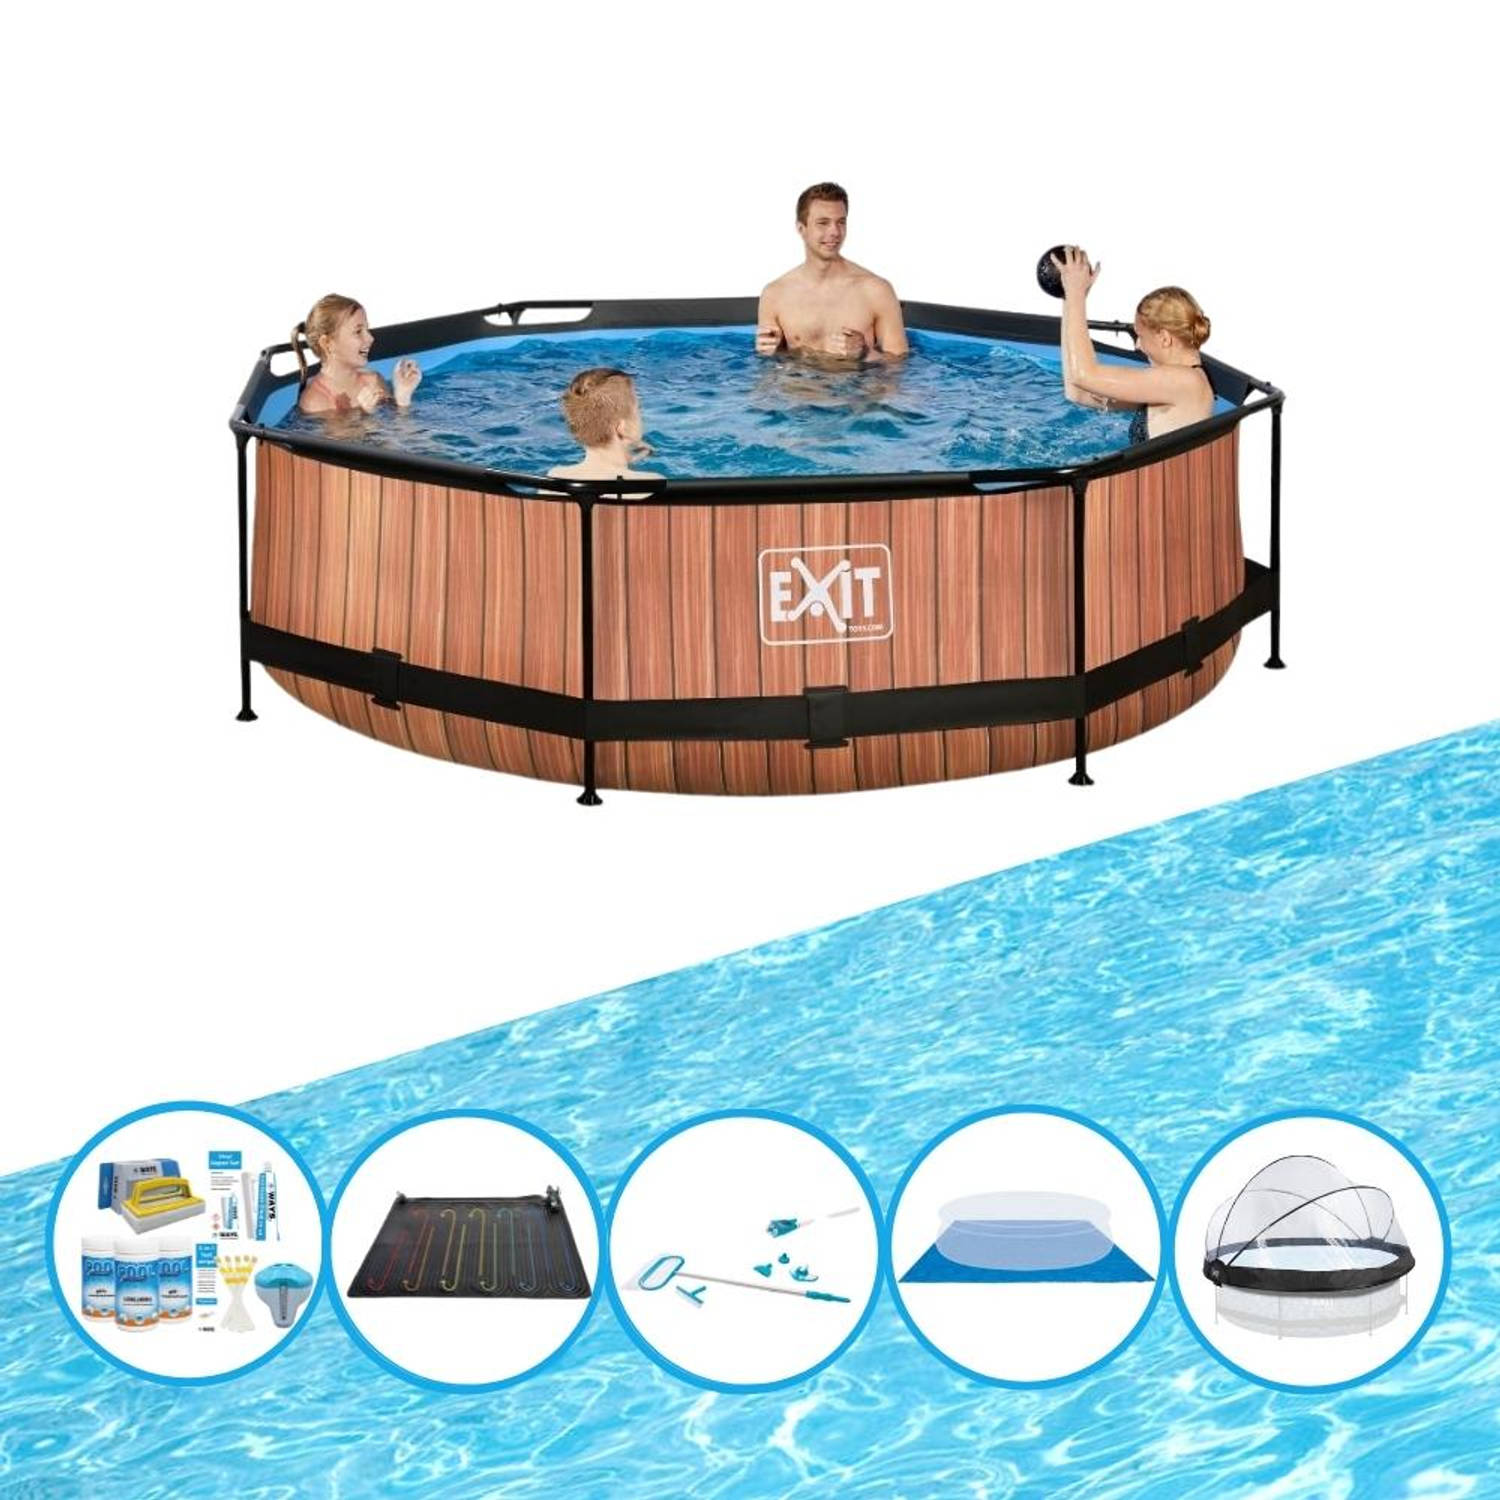 EXIT Zwembad Timber Style - ø300x76 cm - Frame Pool - Inclusief bijbehorende accessoires